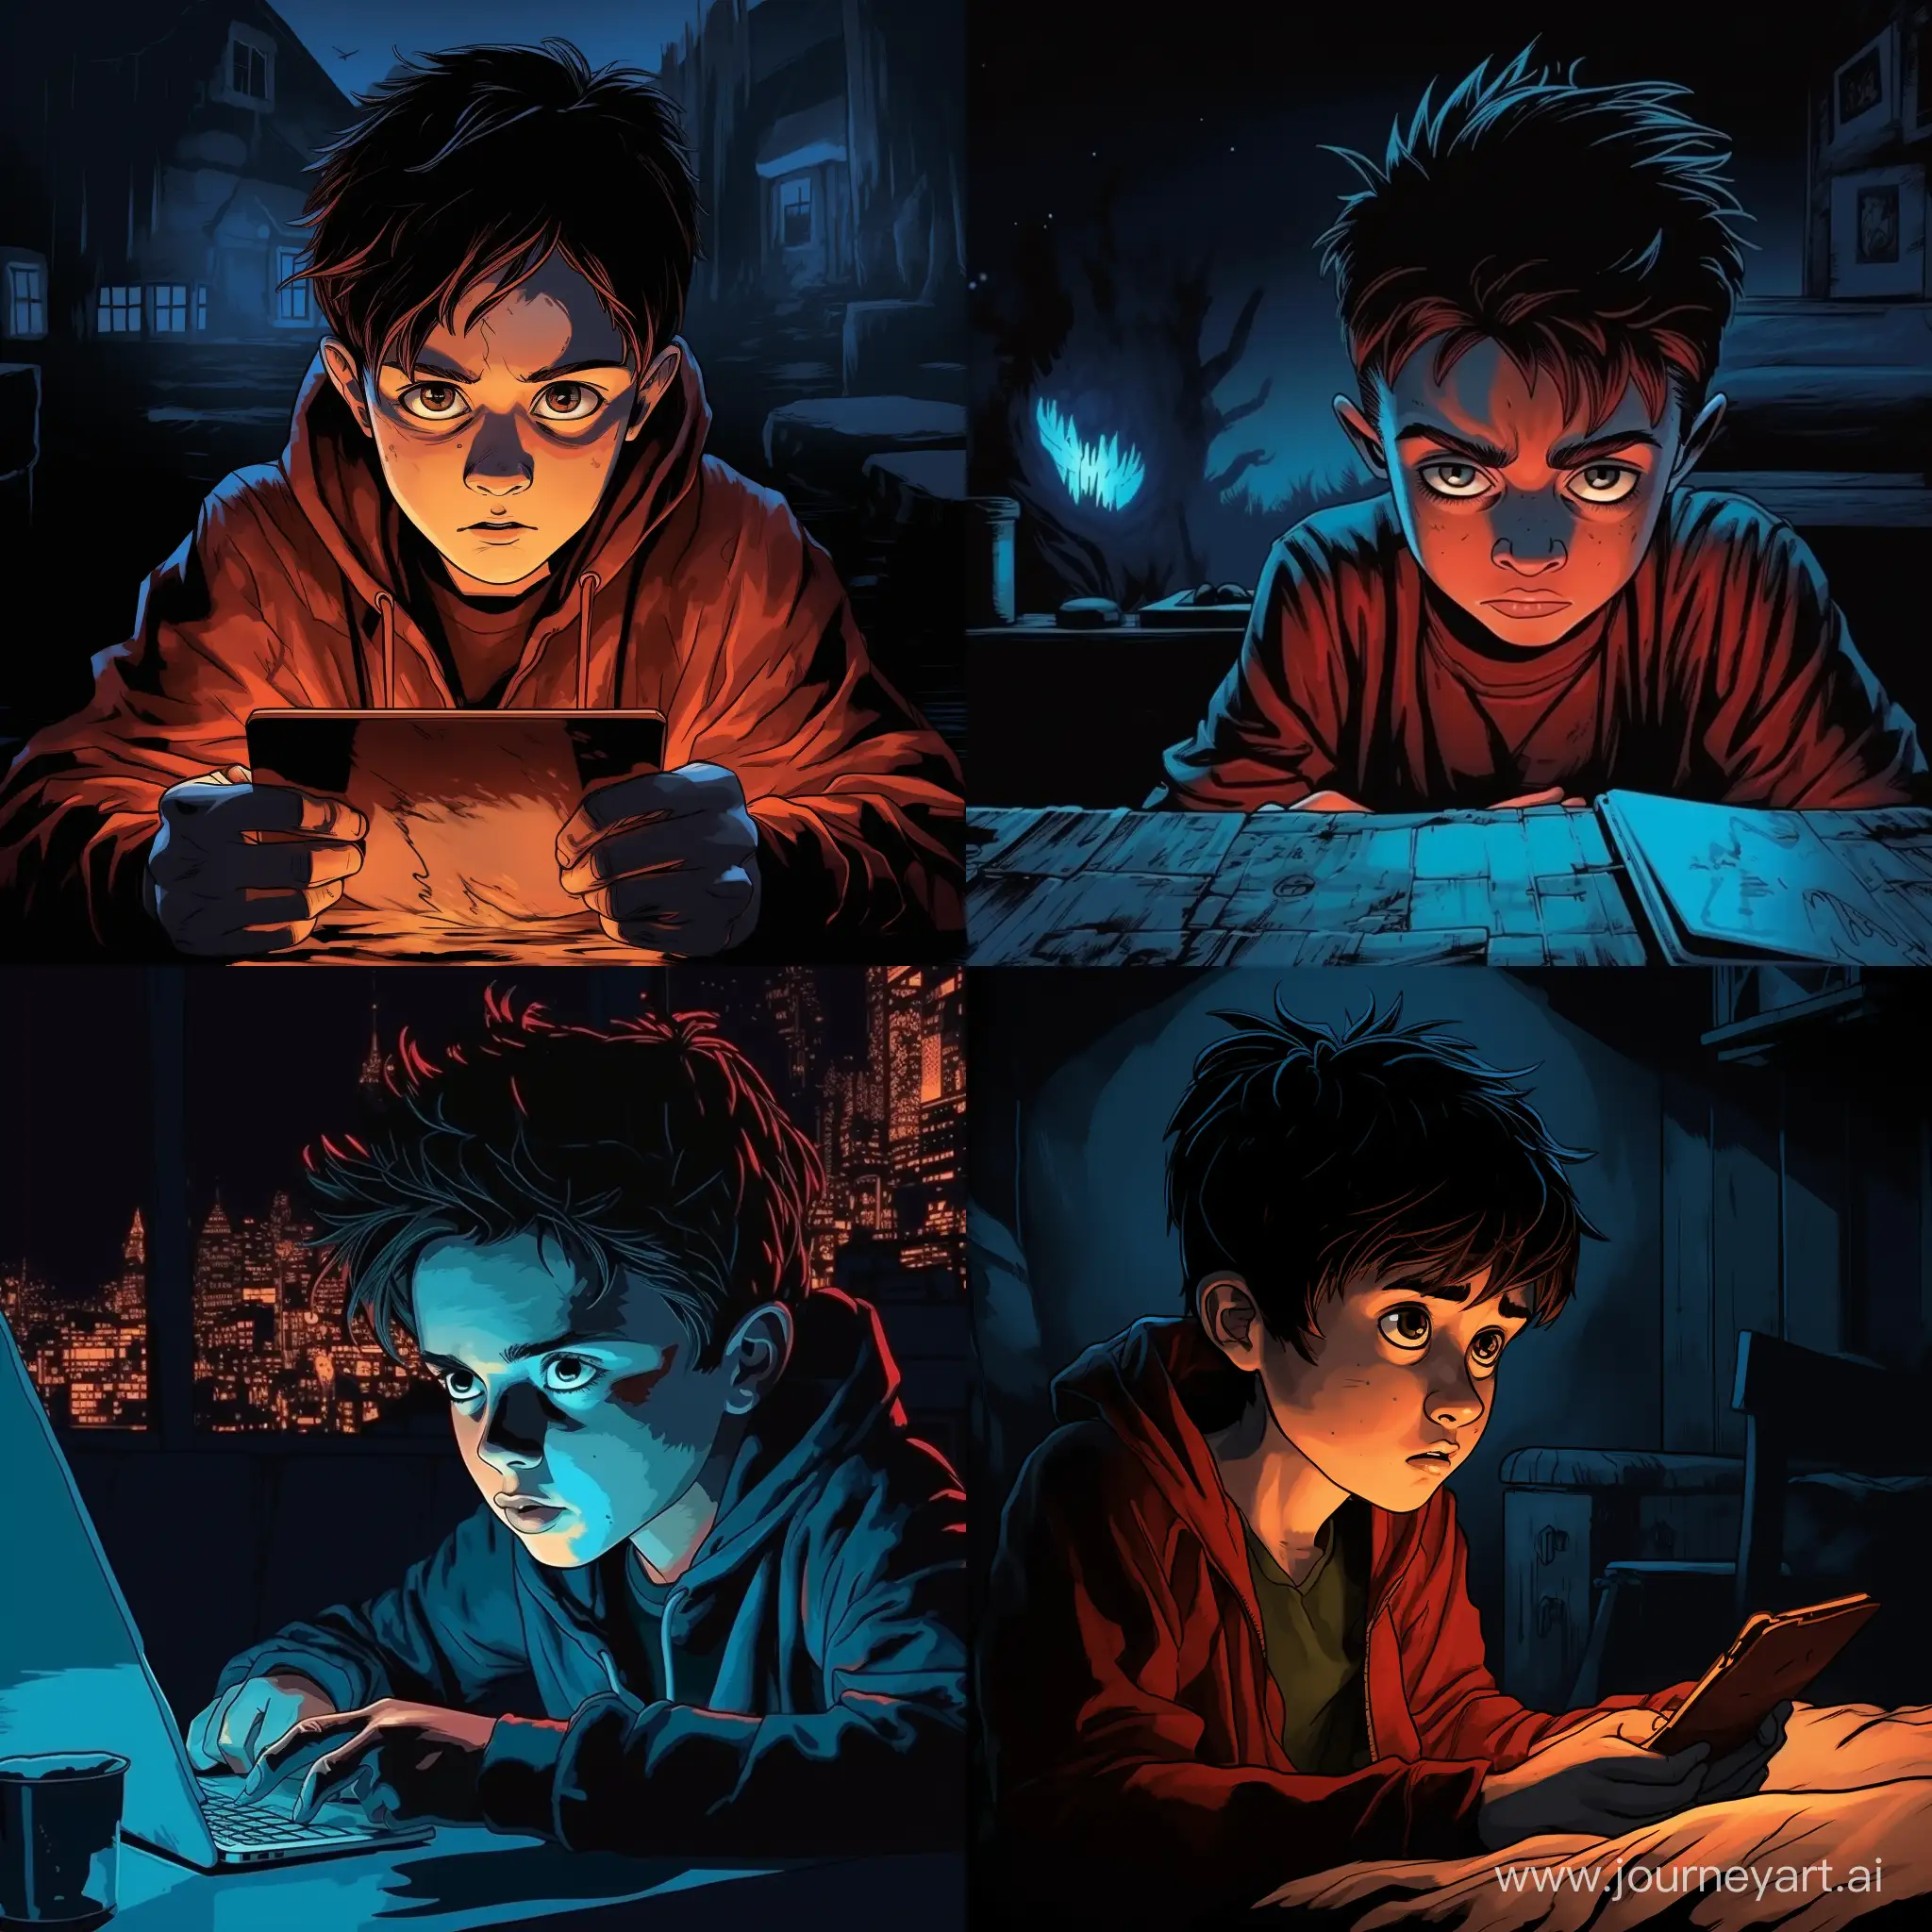 Enchanting-Night-Child-with-Red-Eyes-Engrossed-in-Tablet-in-Comic-Book-Style